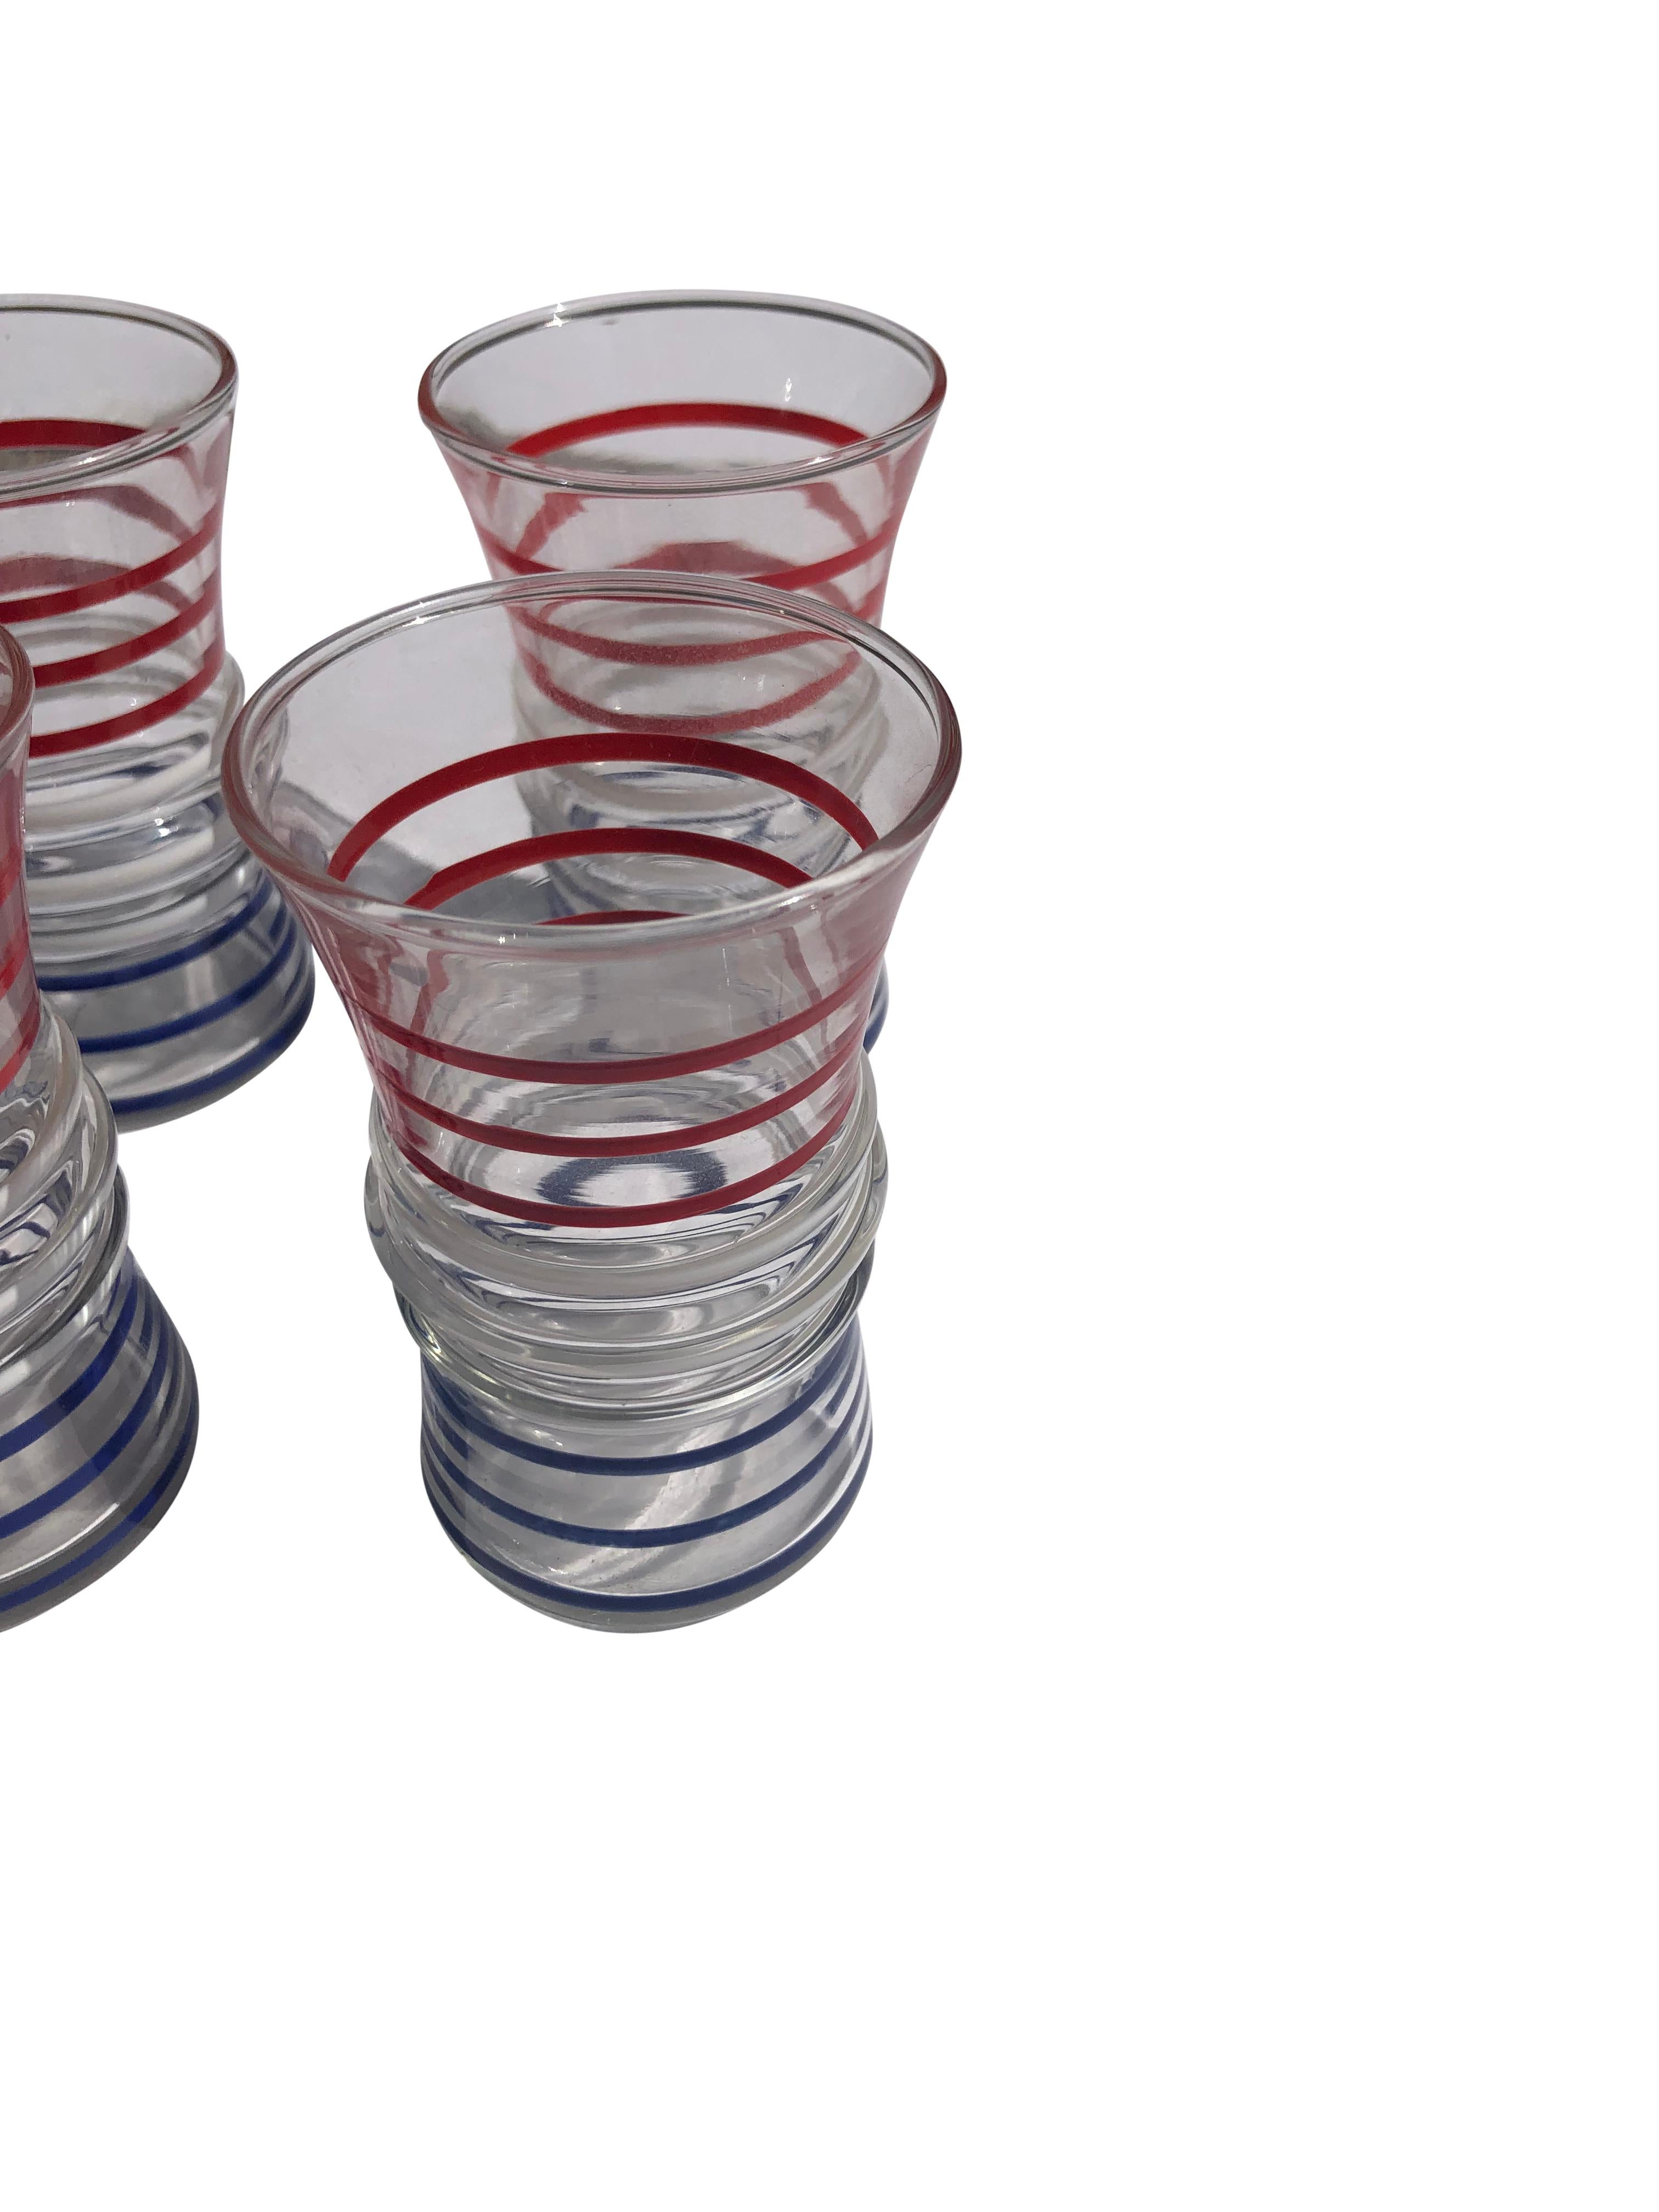 Mid-Century Modern Vintage 4 oz Tumblers with Red, White, and Blue Bands - Set of 6 For Sale